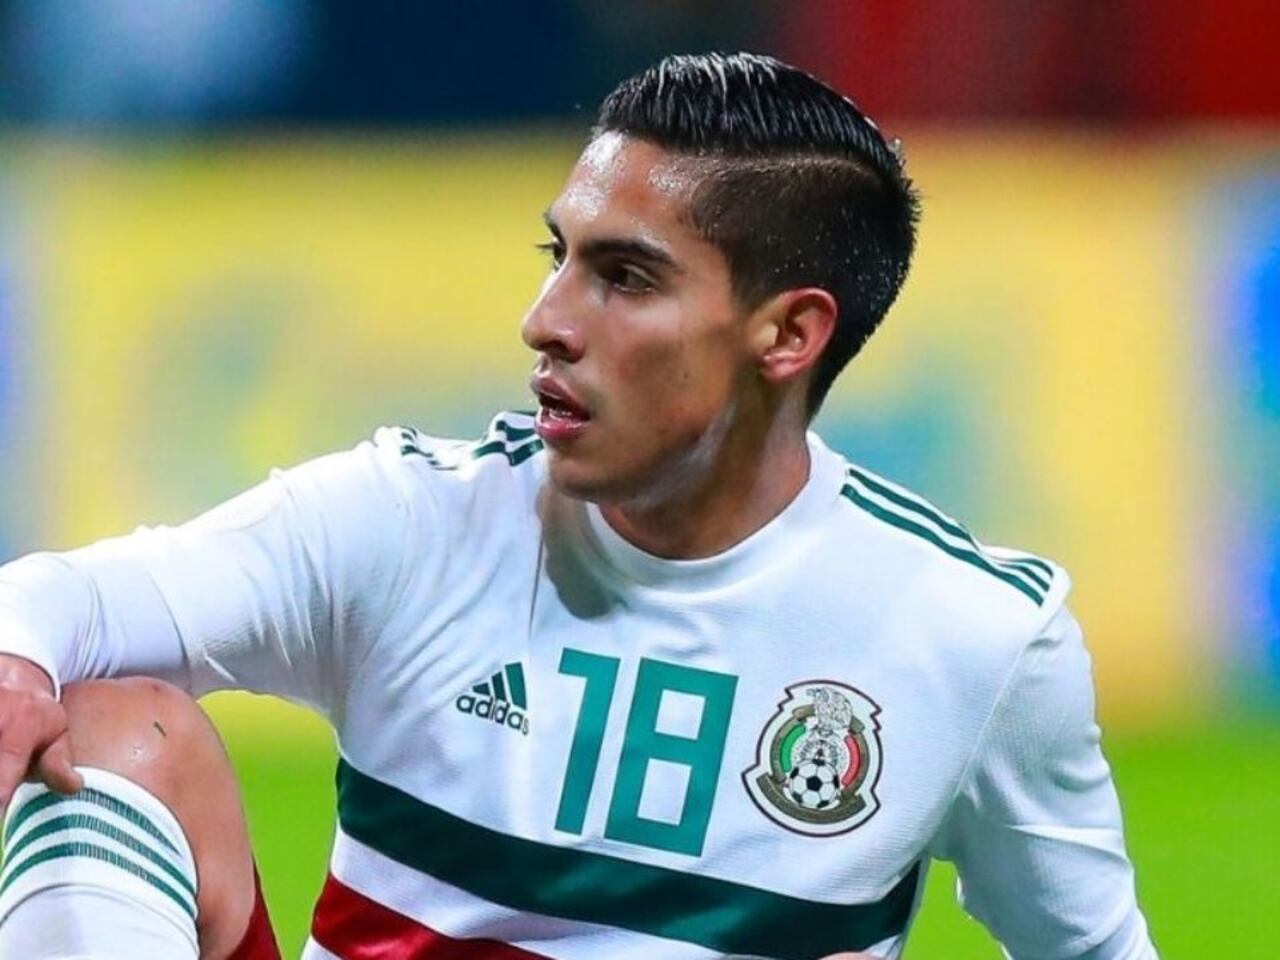 The reason why Erick Aguirre is the ideal replacement for Dieter Villalpando in Chivas and how much he could cost